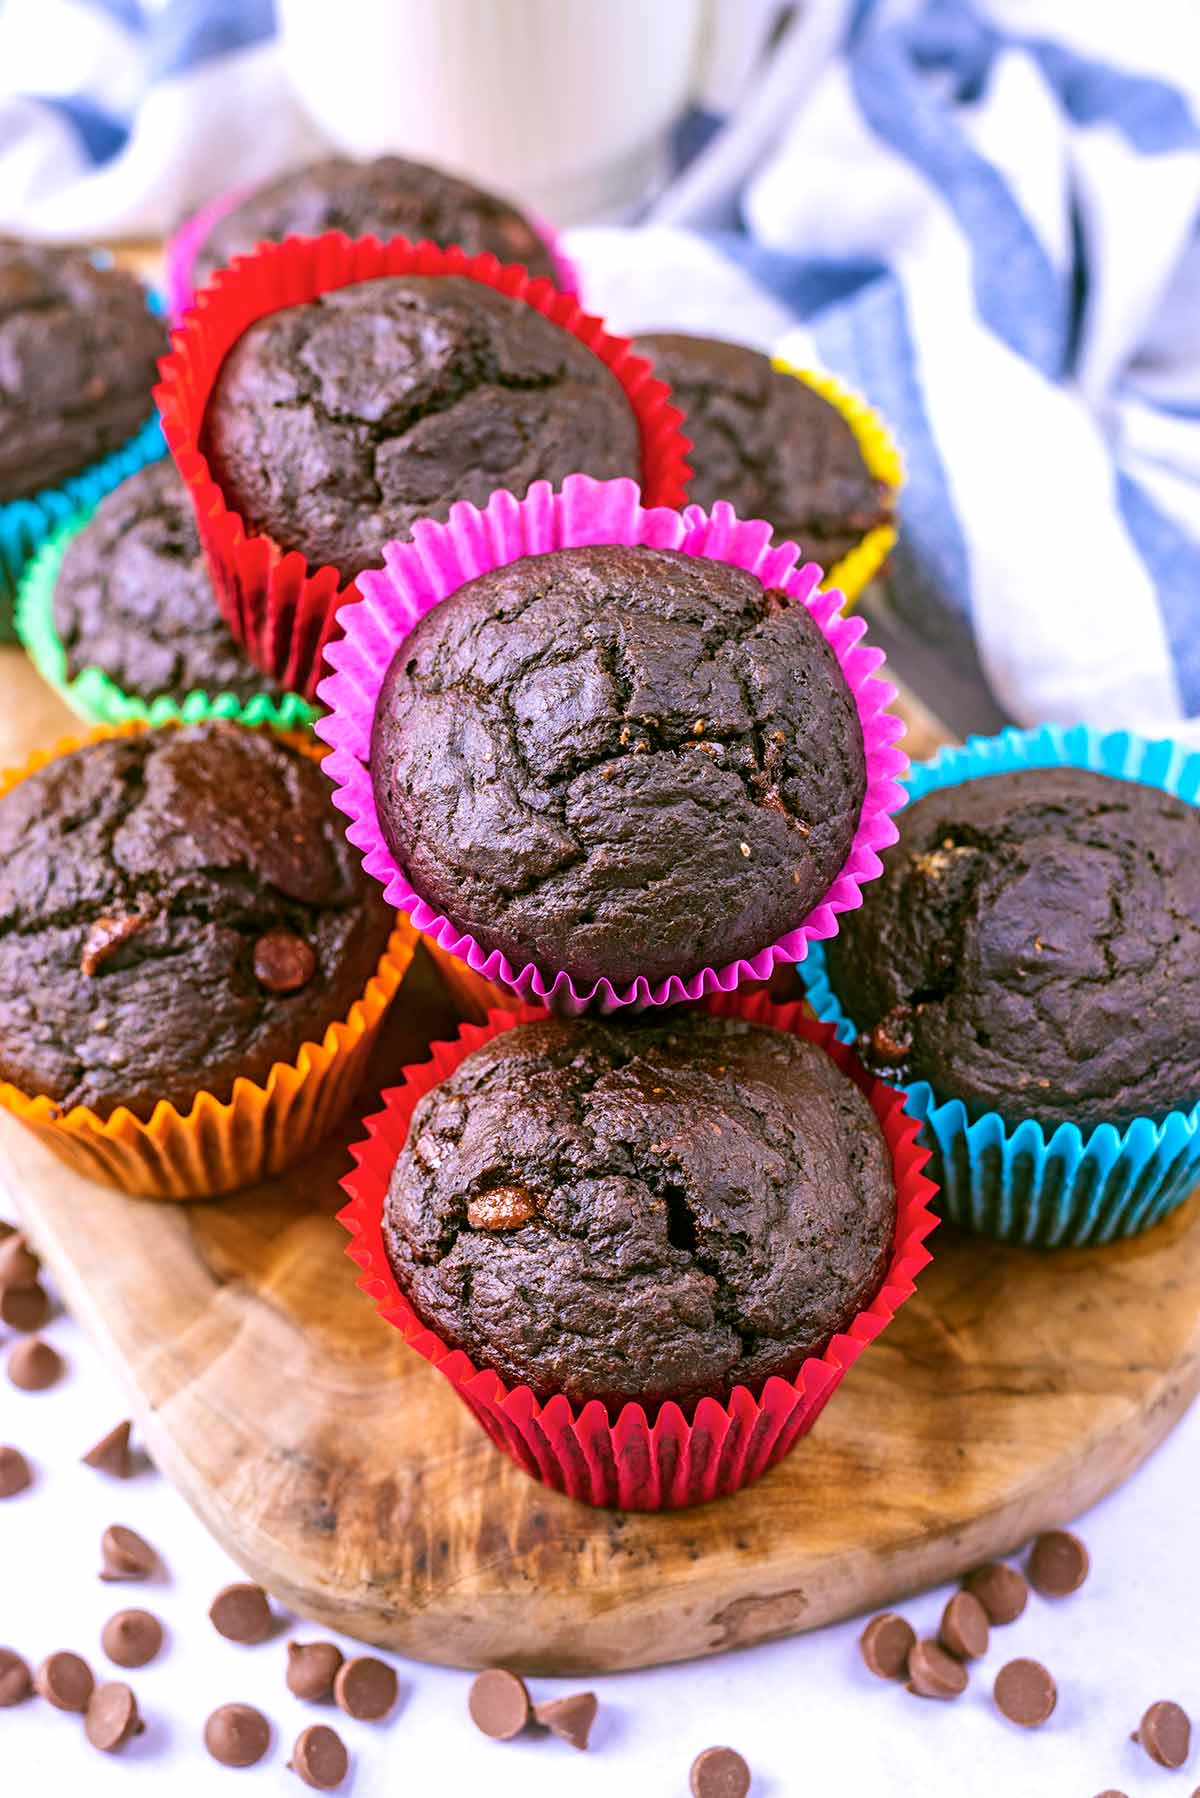 Chocolate muffins piled up on a board in front of a striped towel.